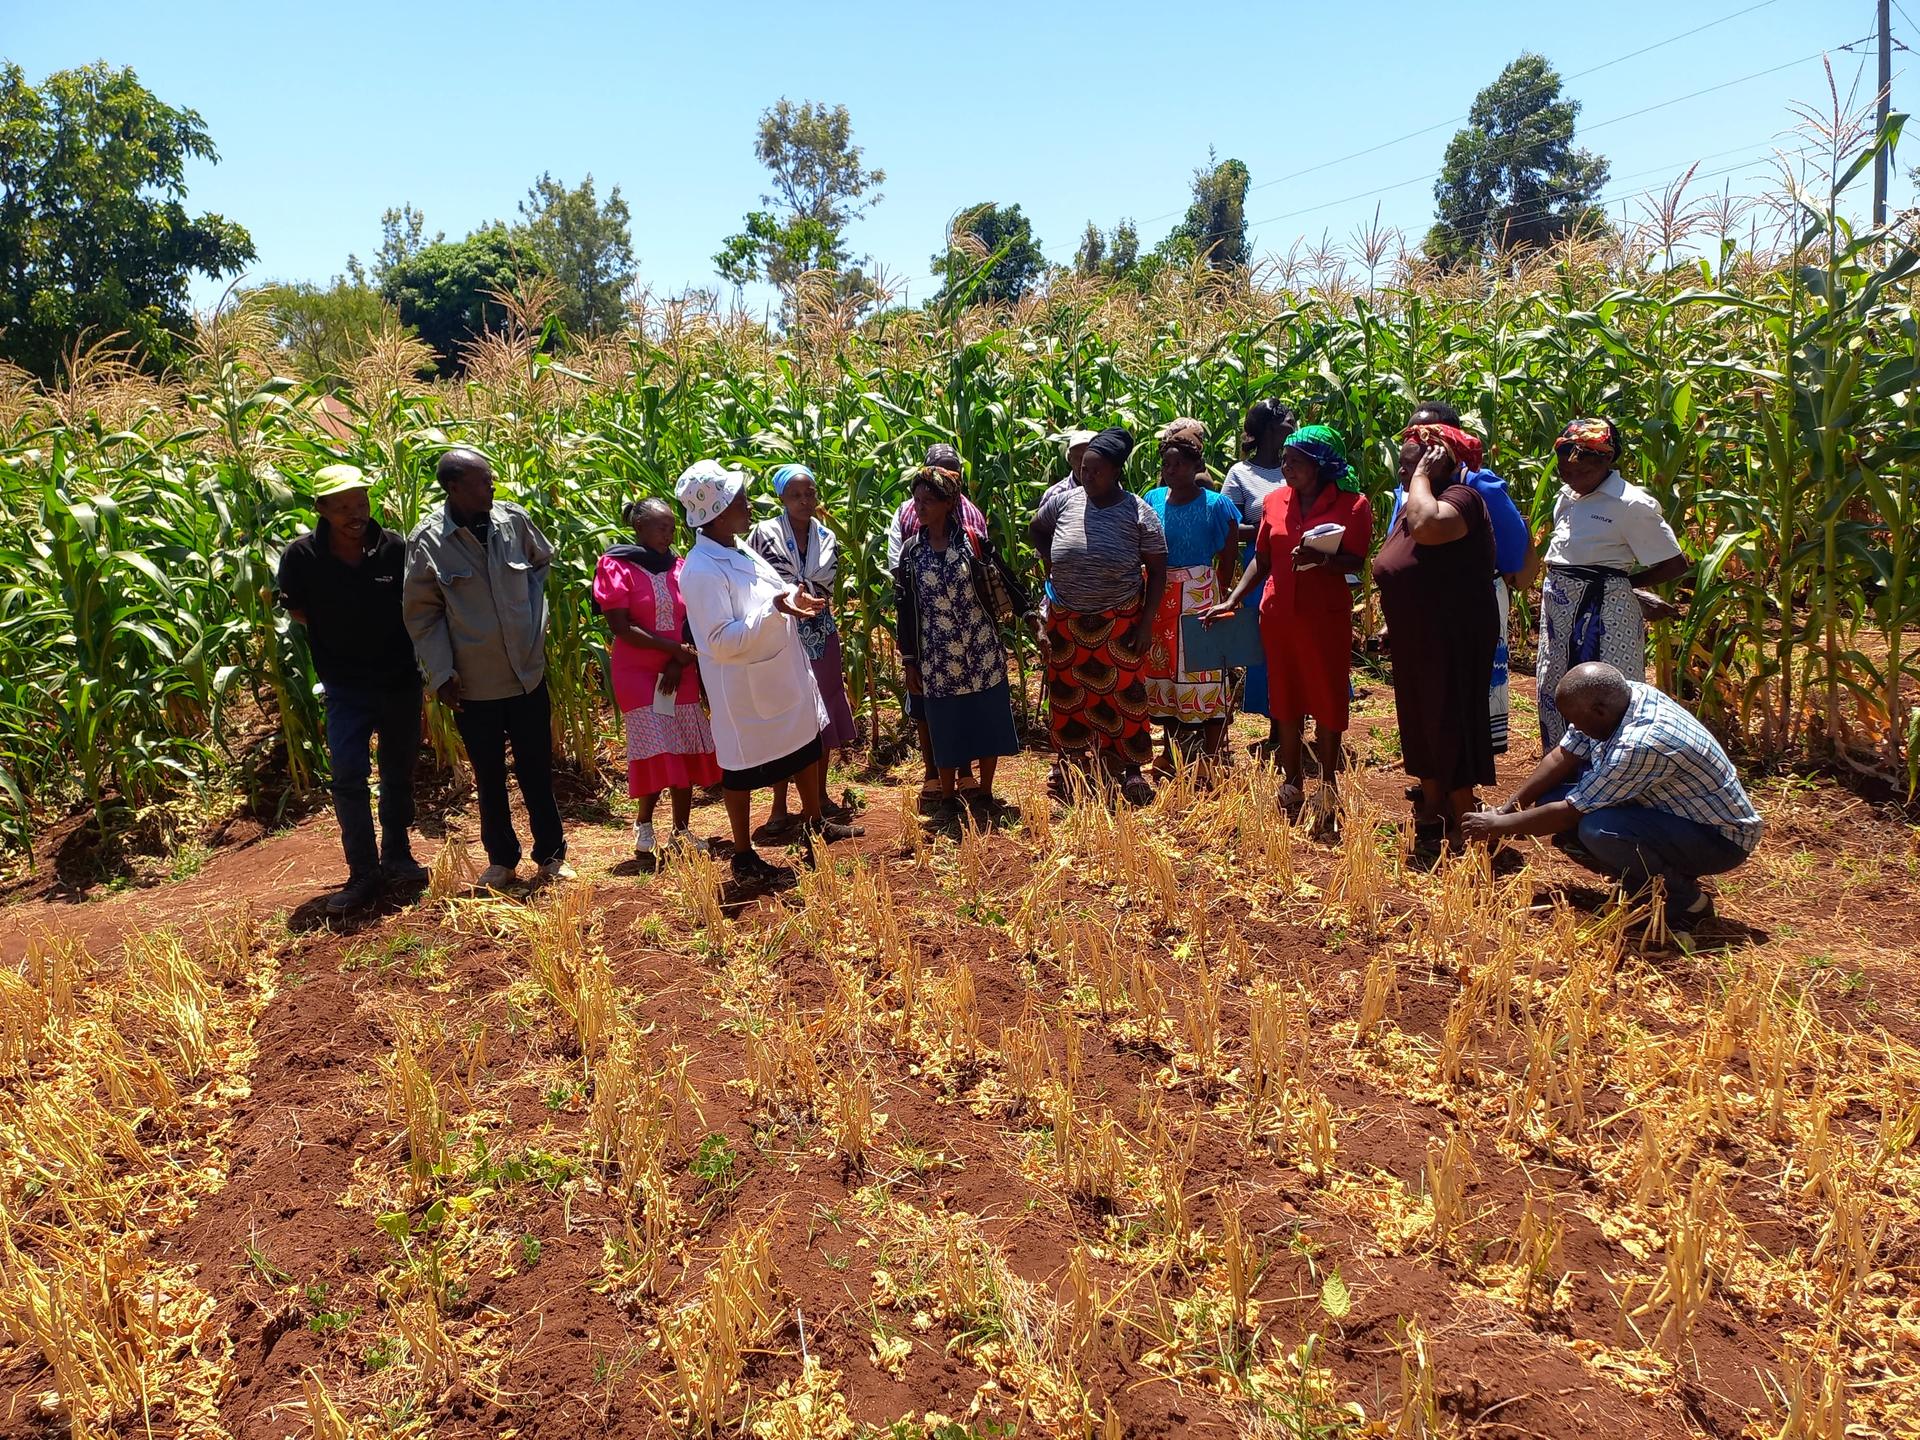 Co-design and learning around diversification for resilient agrifood systems in Kenya - Embu County Farmers - Alliance Bioversity International & CIAT